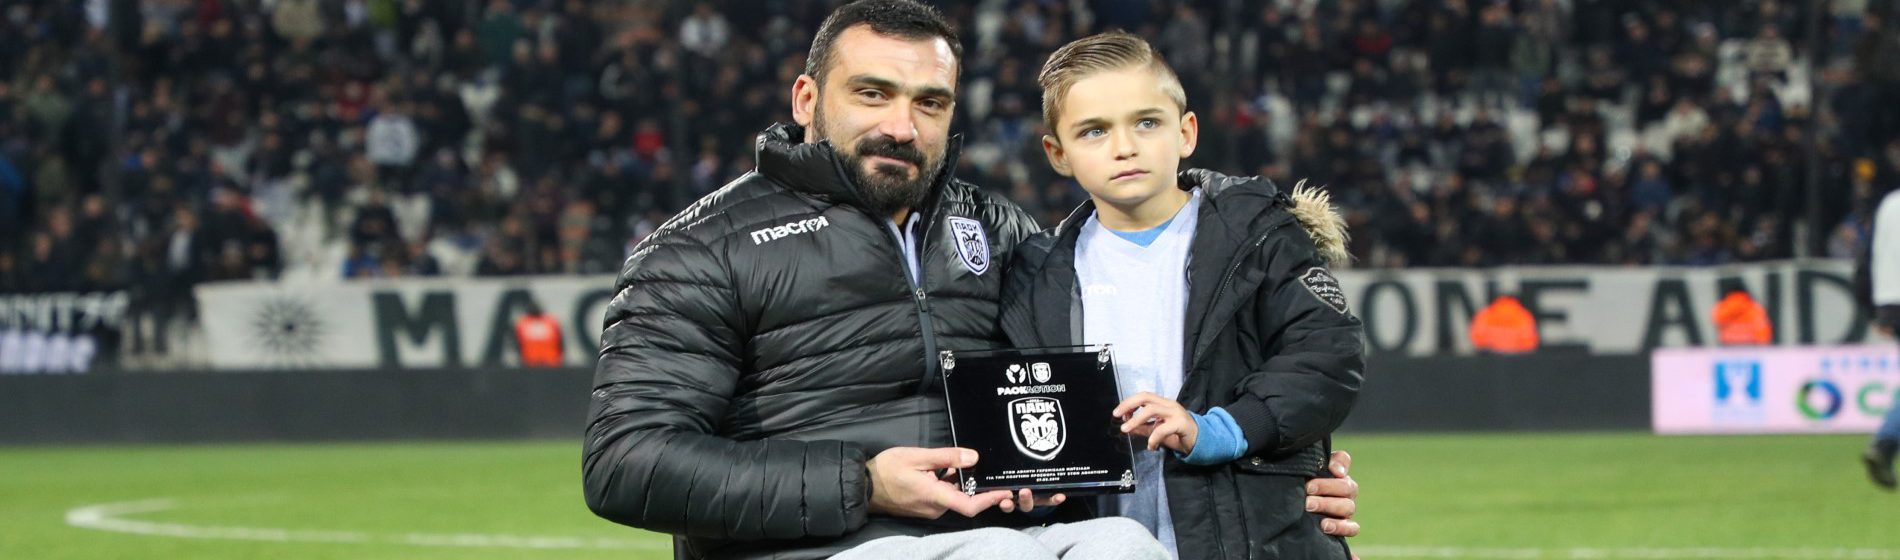 PAOK Family Moments Header